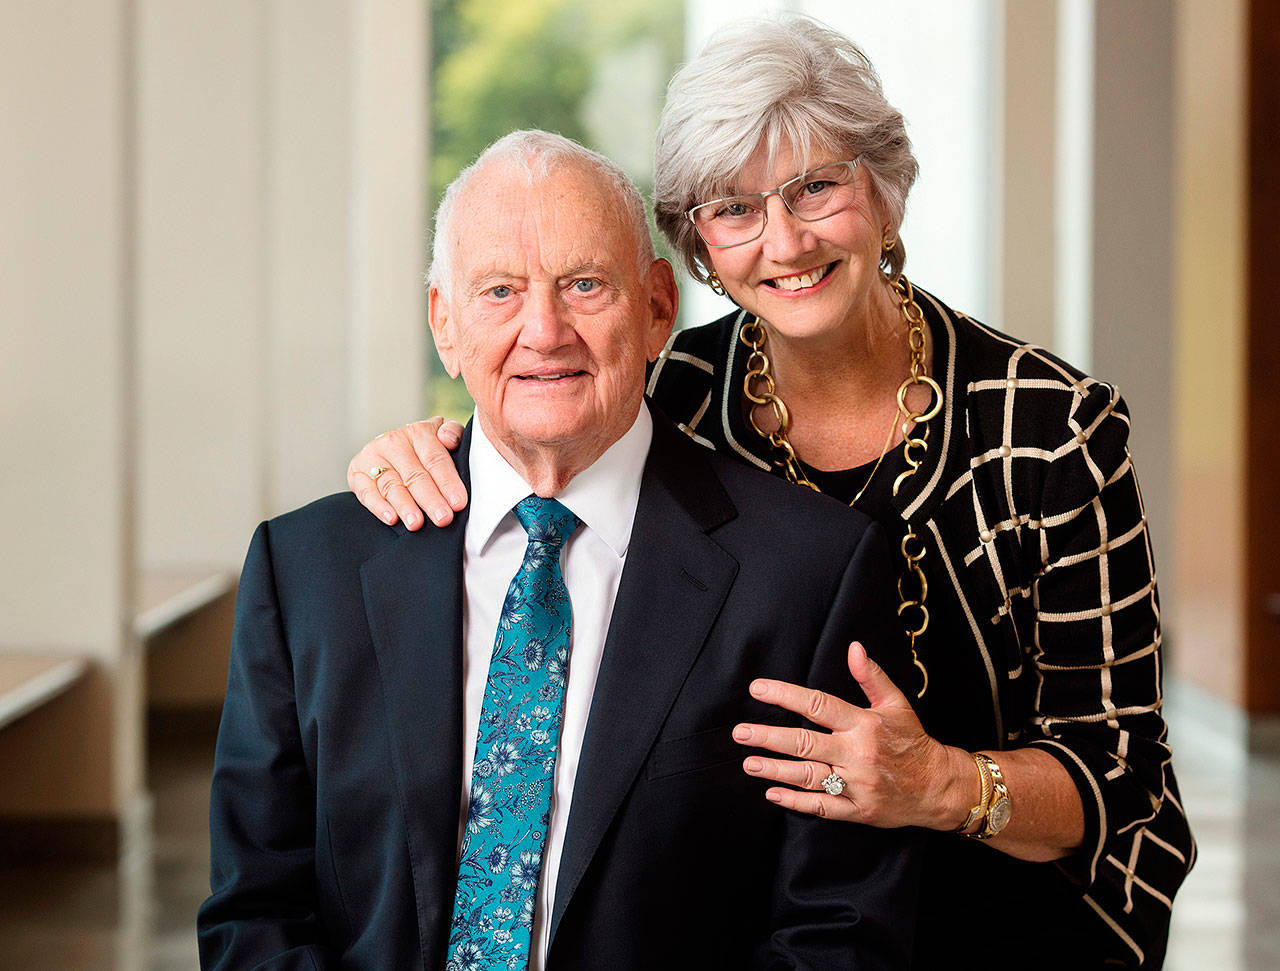 Jerry and Debbie Ivy. Jerry Ivy is the CEO of Auto-Chlor System, opening this year in Kent. The California couple last year gave $50 million to Iowa State University, the alma mater of Jerry Ivy. COURTESY PHOTO, Iowa State University